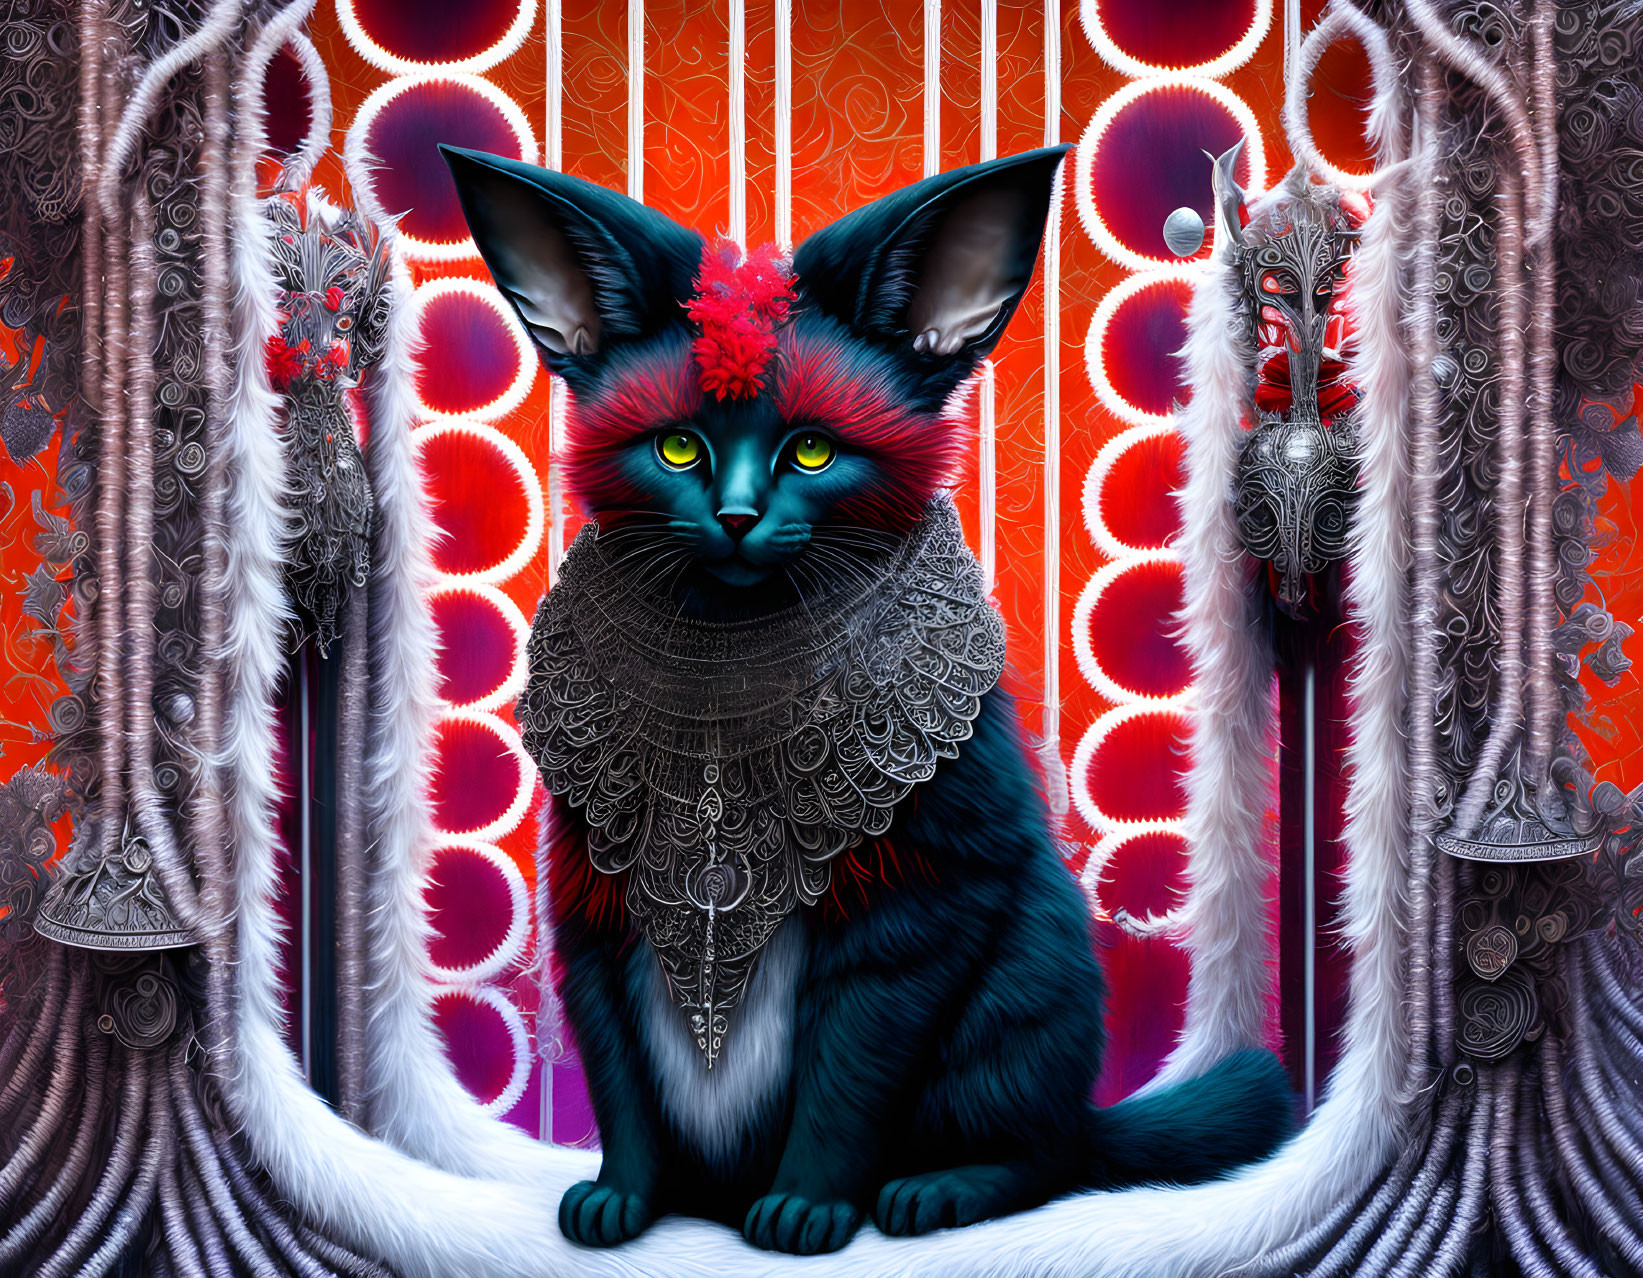 Surreal black cat with yellow eyes and red headdress against colorful backdrop